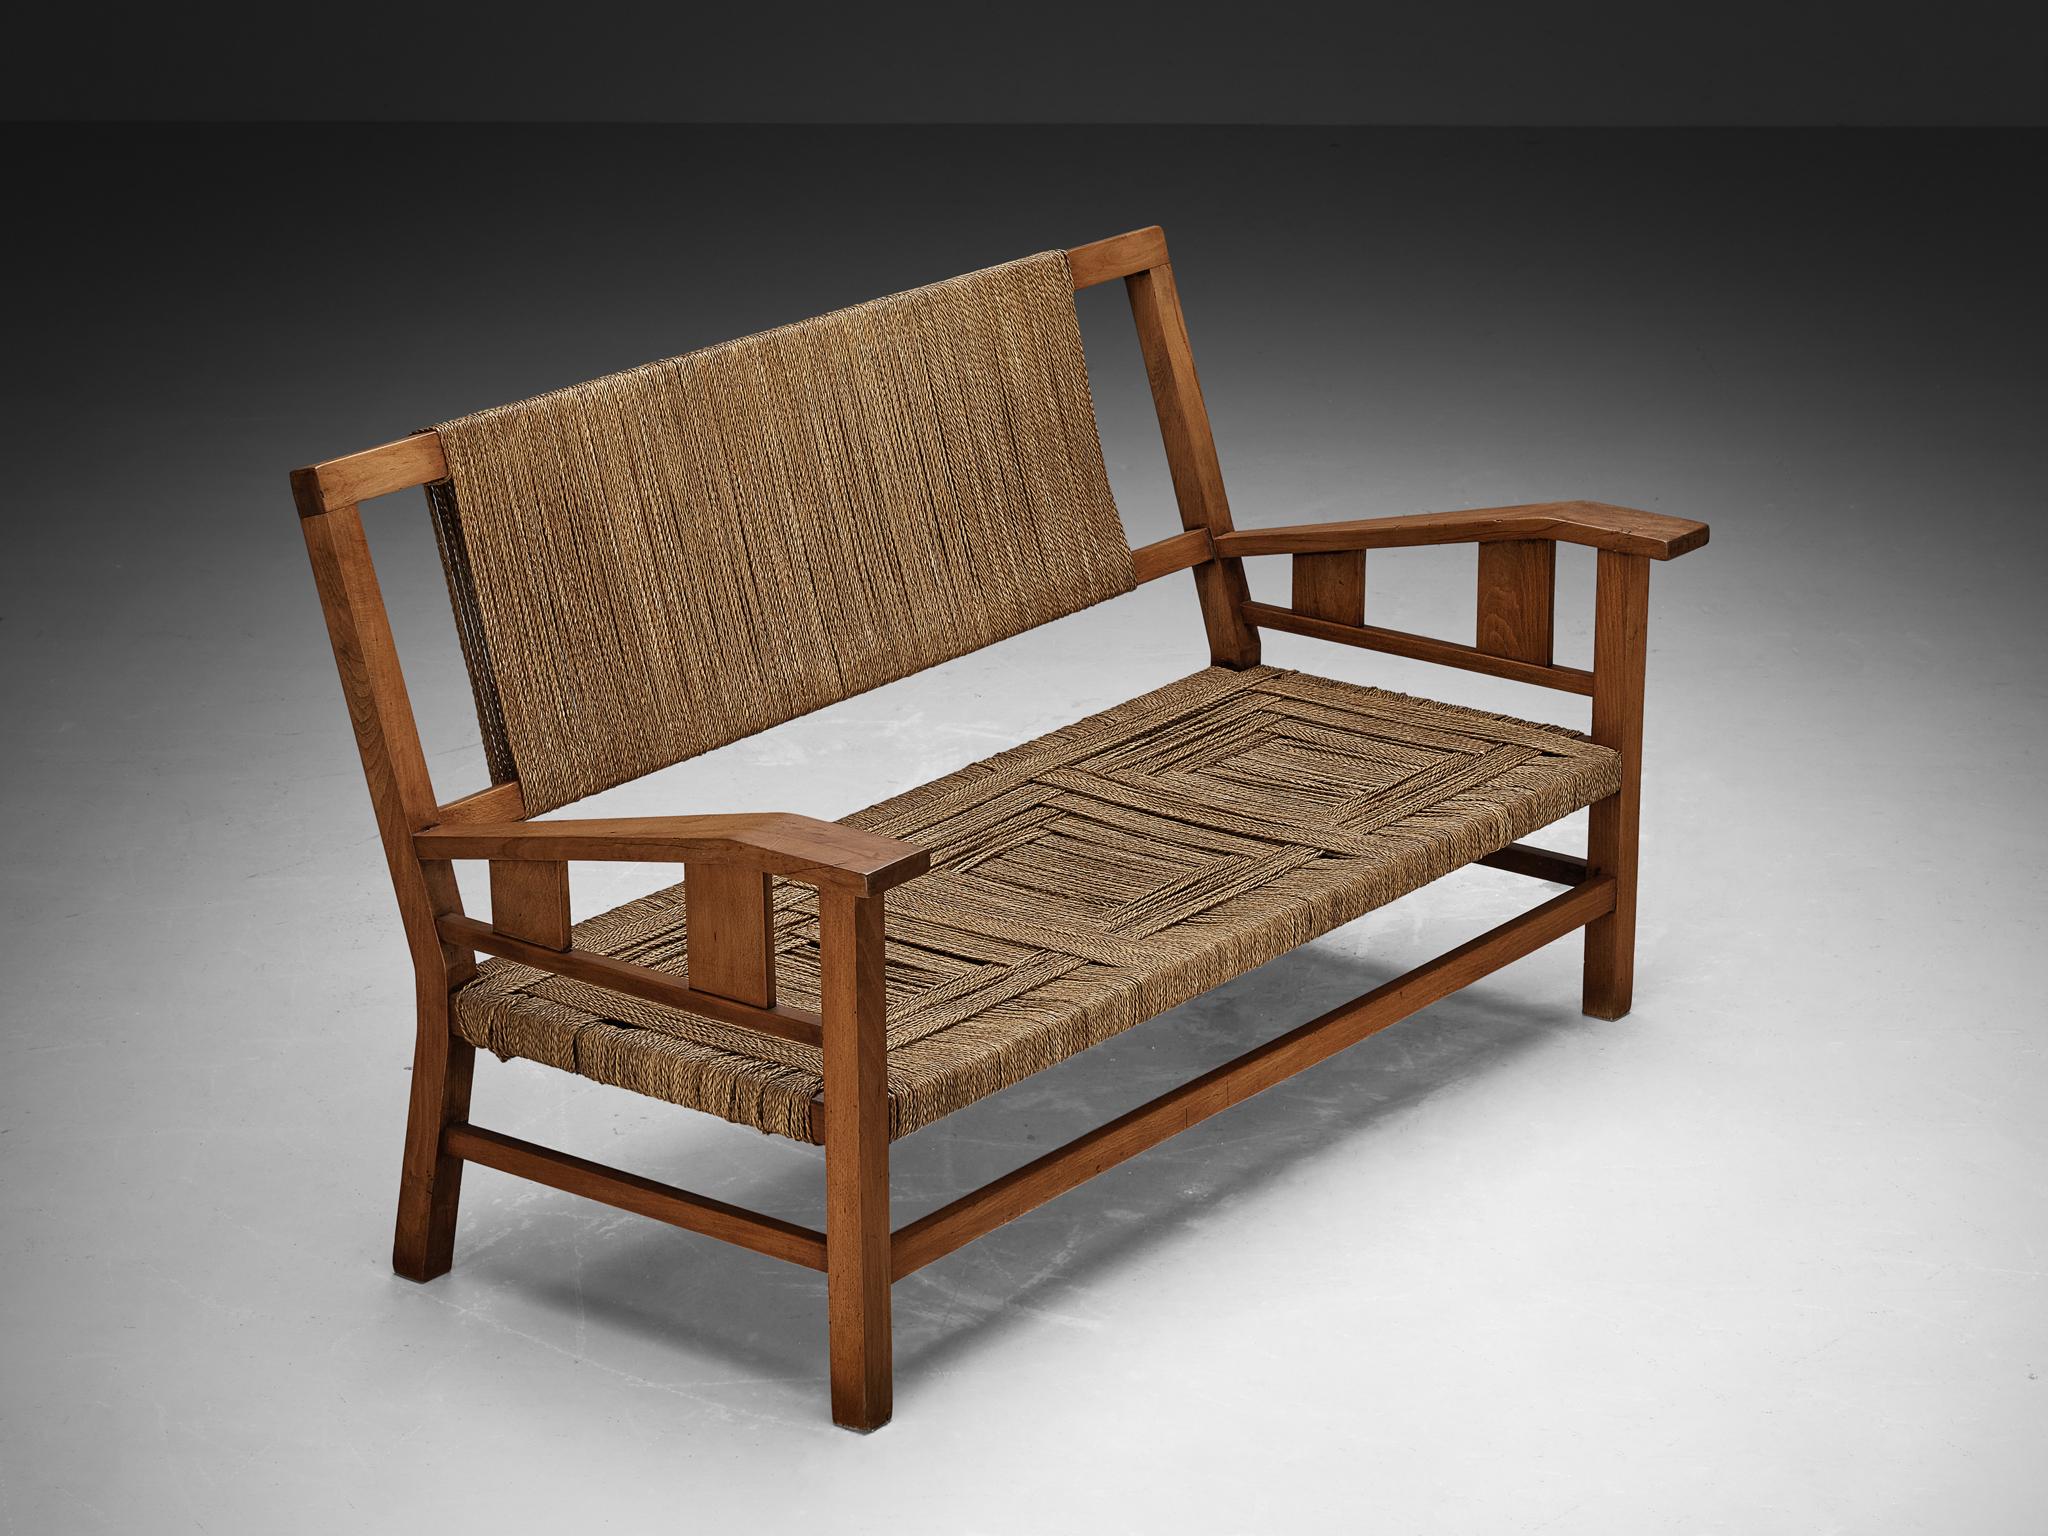 Francis Jourdain, sofa or bench, straw, stained beech, France, 1930s

This exceptional sofa is a design by French painter and cabinetmaker Francis Jourdain (1976-1958) and exudes a refined provincial charm, embodying an exquisite elegance of